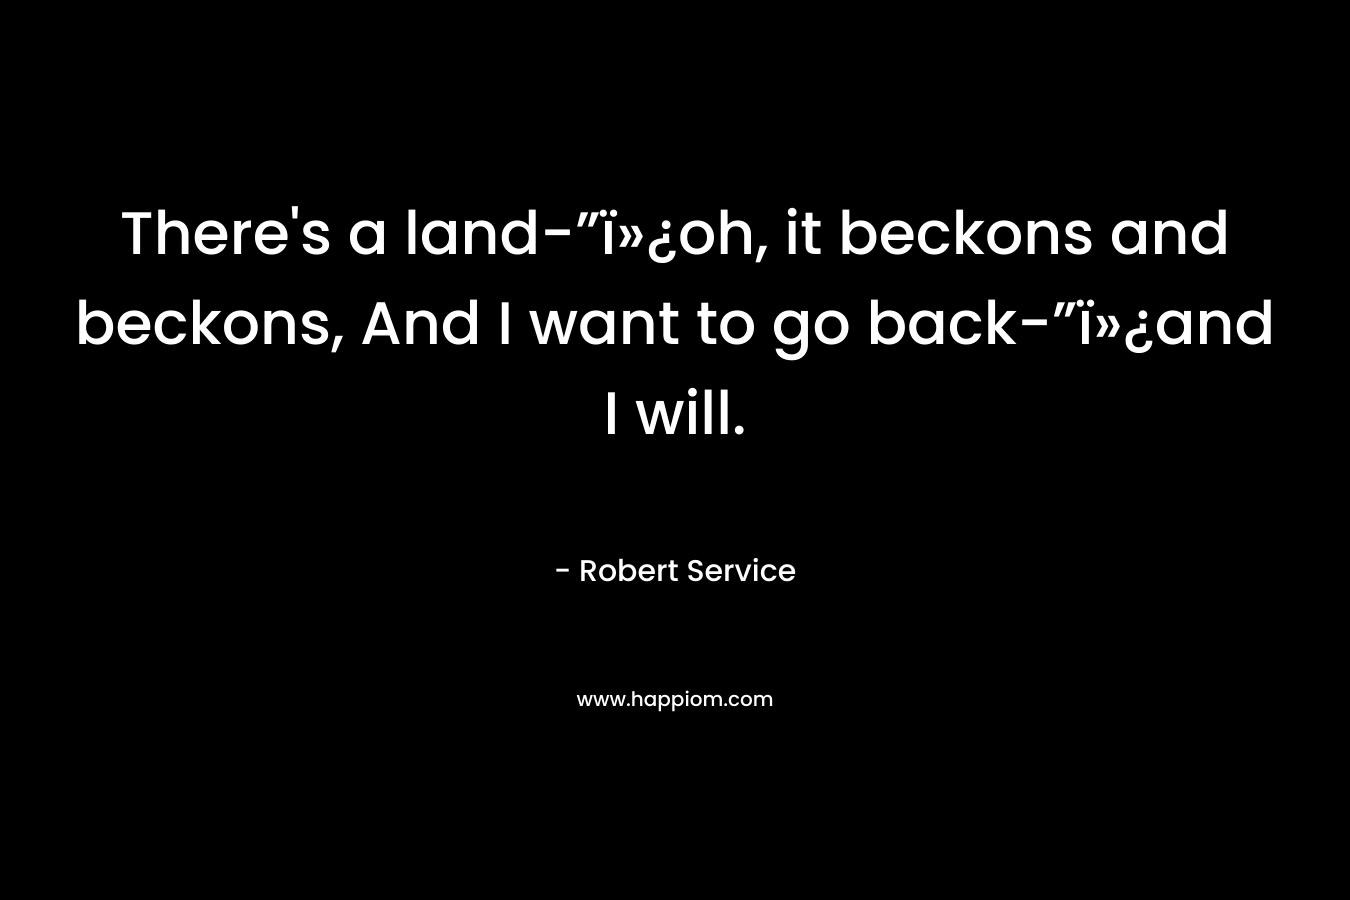 There’s a land-”ï»¿oh, it beckons and beckons,  And I want to go back-”ï»¿and I will. – Robert Service